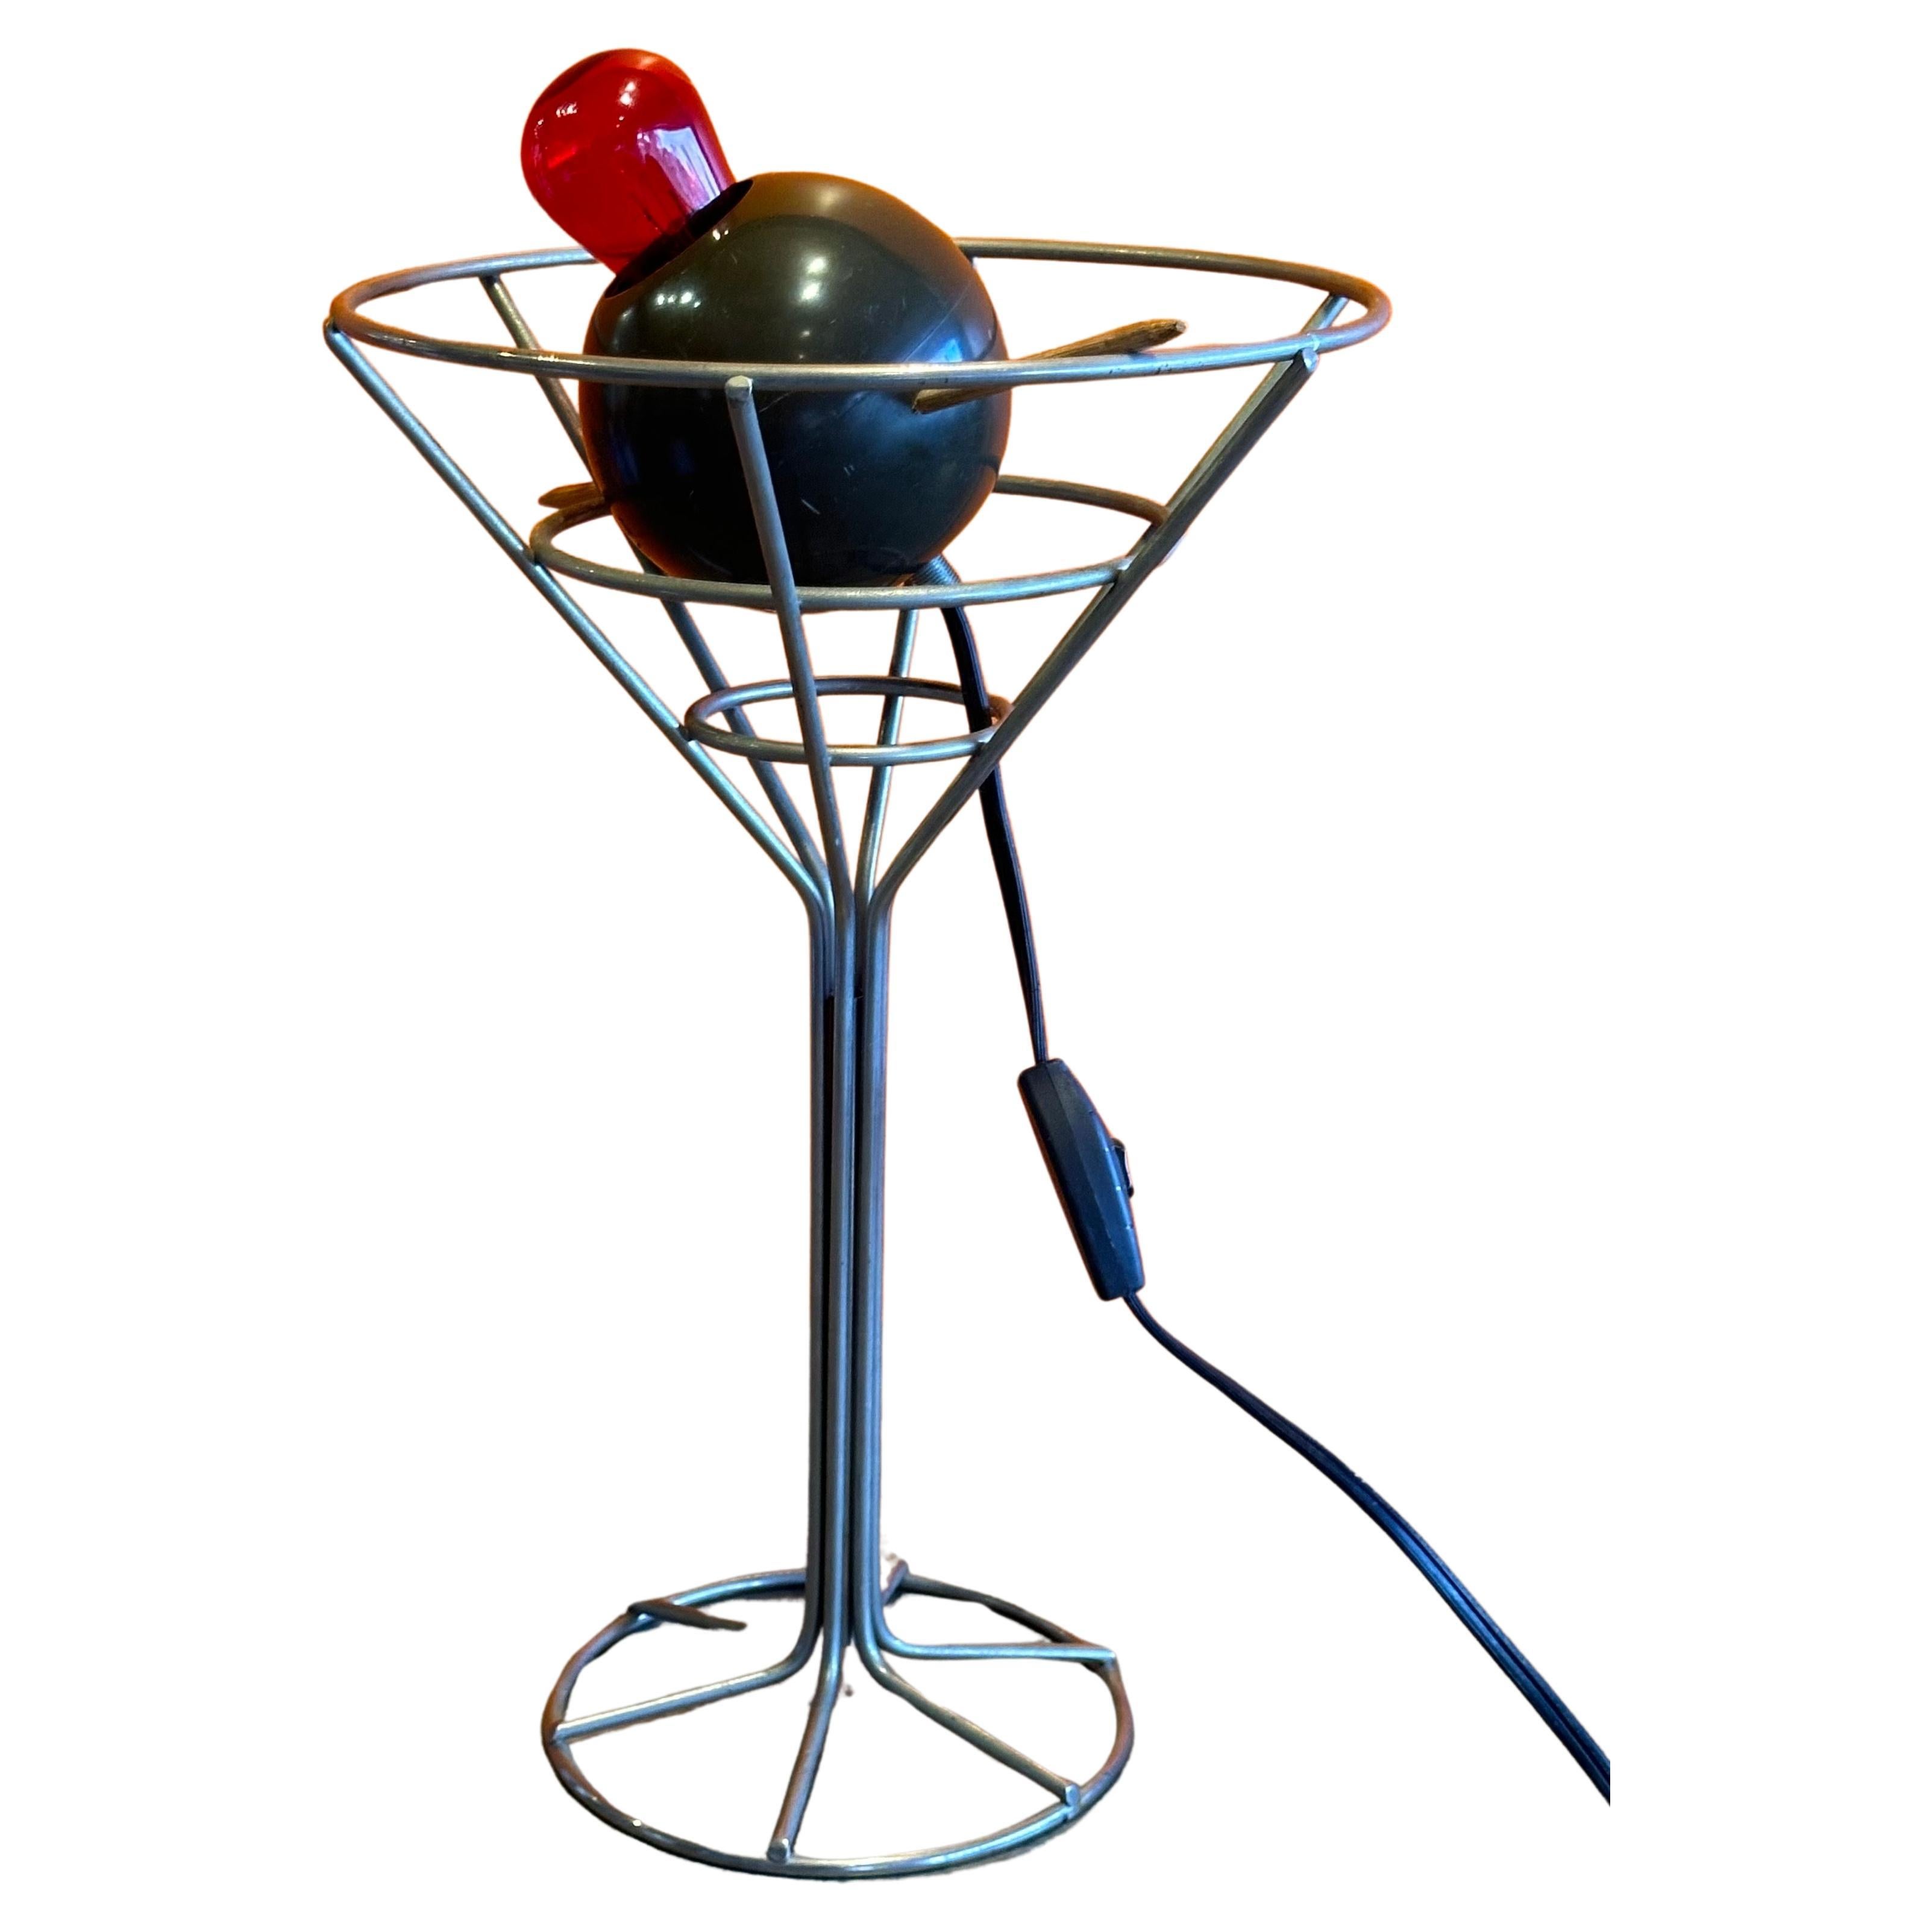 A unique and hard to find vintage martini with olive bar lamp by David Krys, circa 1990s. The pop art lamp is made of chrome and molded plastic and has a pimento red bulb with toothpick; this piece is extremely cool! The lamp is in good working